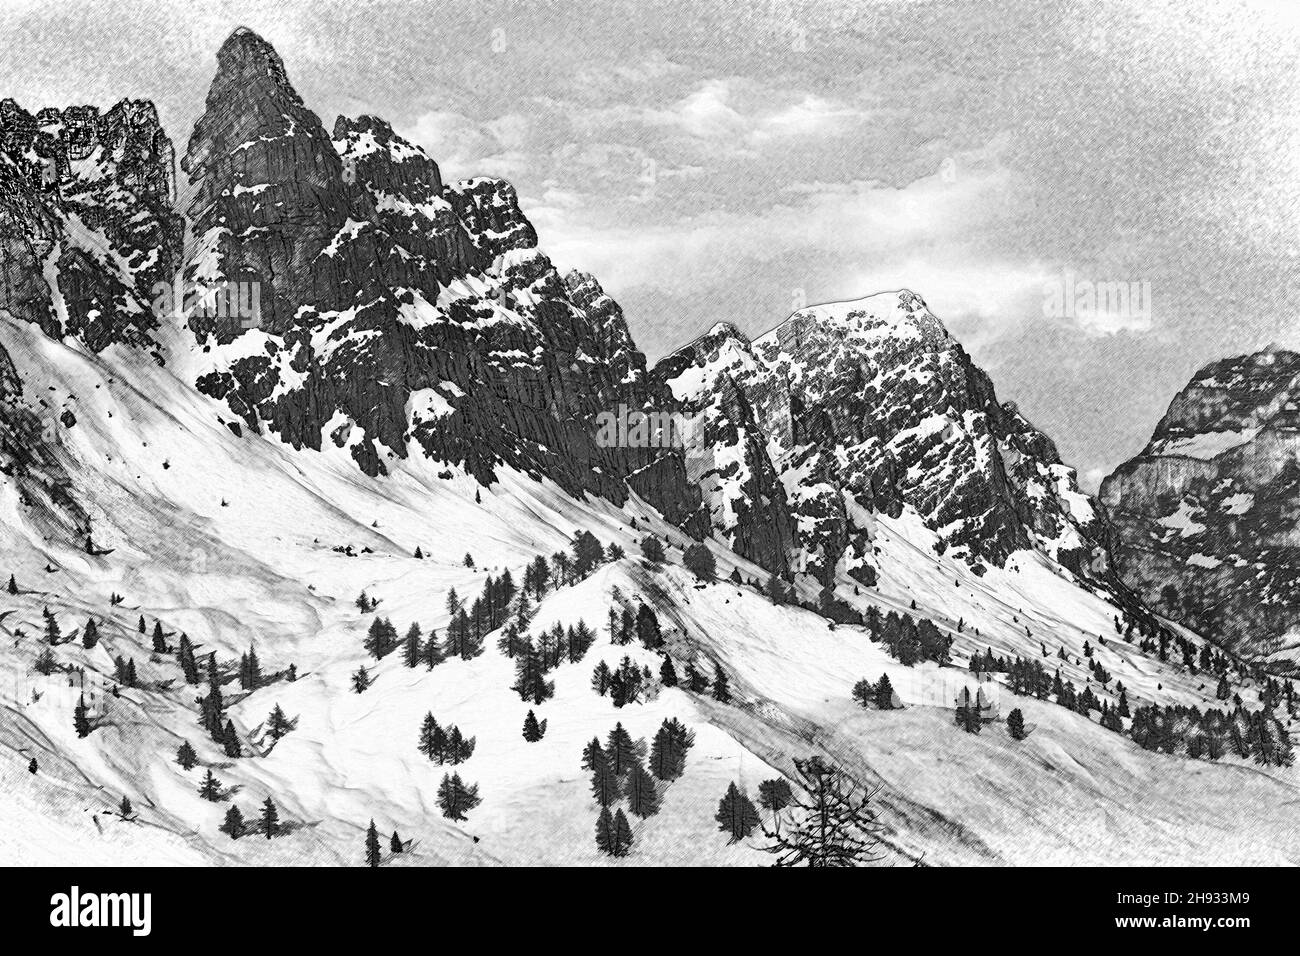 Illustration with charcoal technique of of dolomite peaks in winter conditions Stock Photo